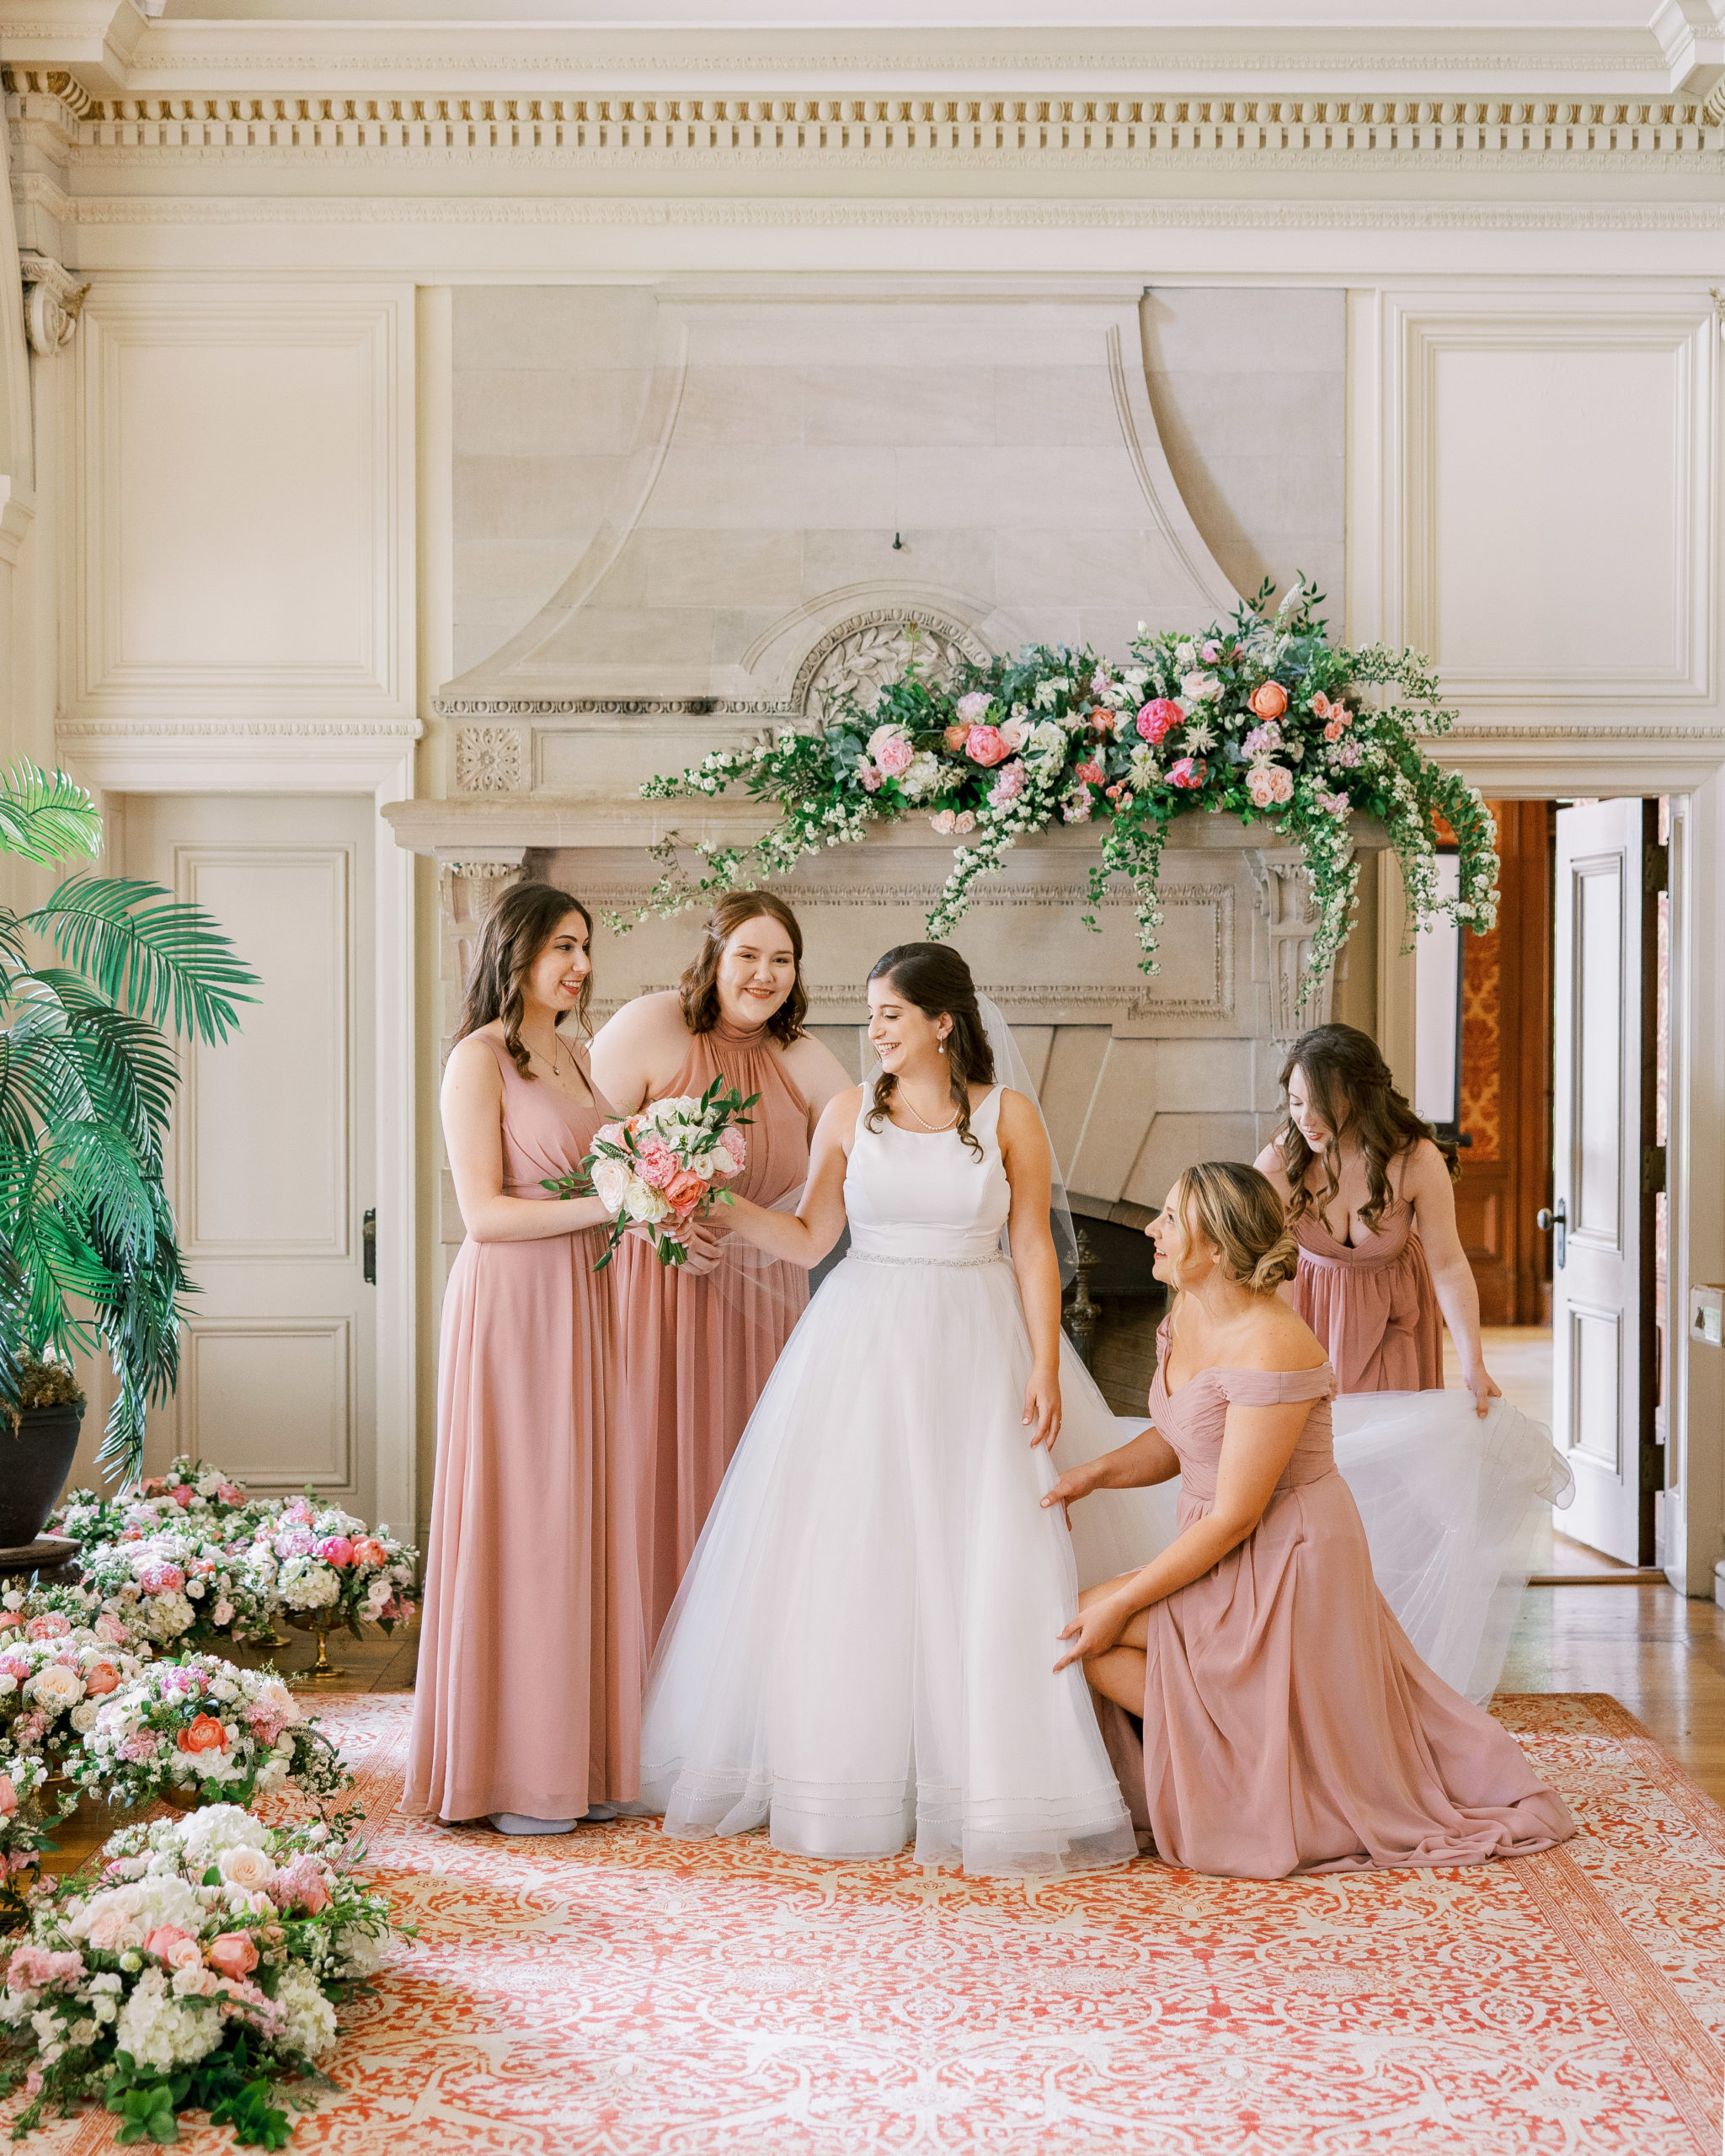 Bridesmaid surround bride and help with dress and flowers at Cairnwood Estate Wedding Photography